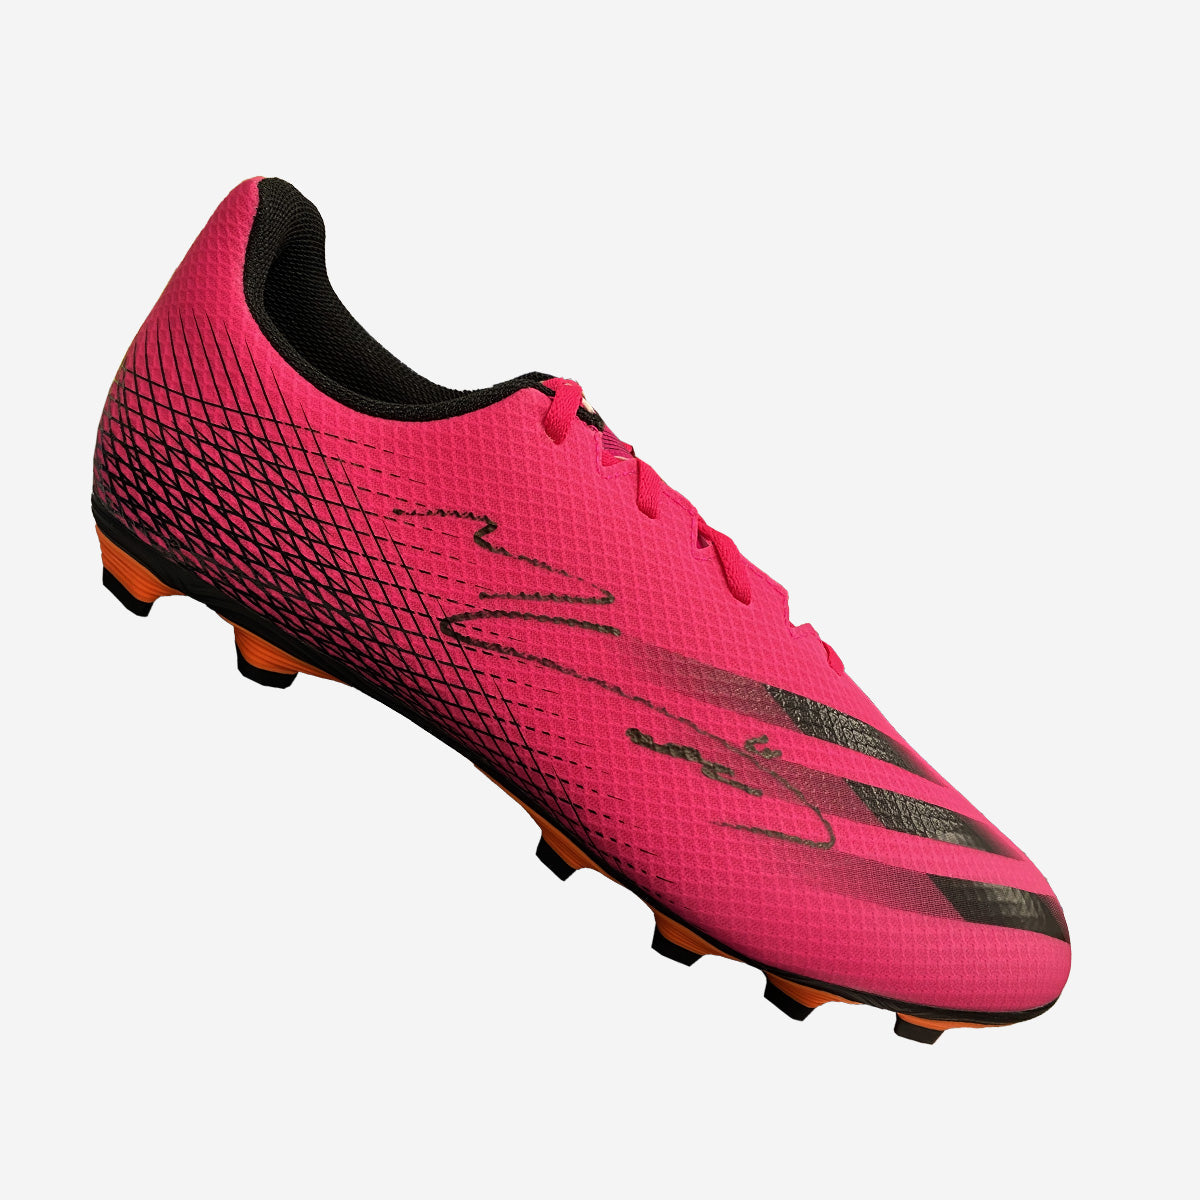 Mohamed Salah Signed Black and Pink Adidas Boot - The Bootroom Collection